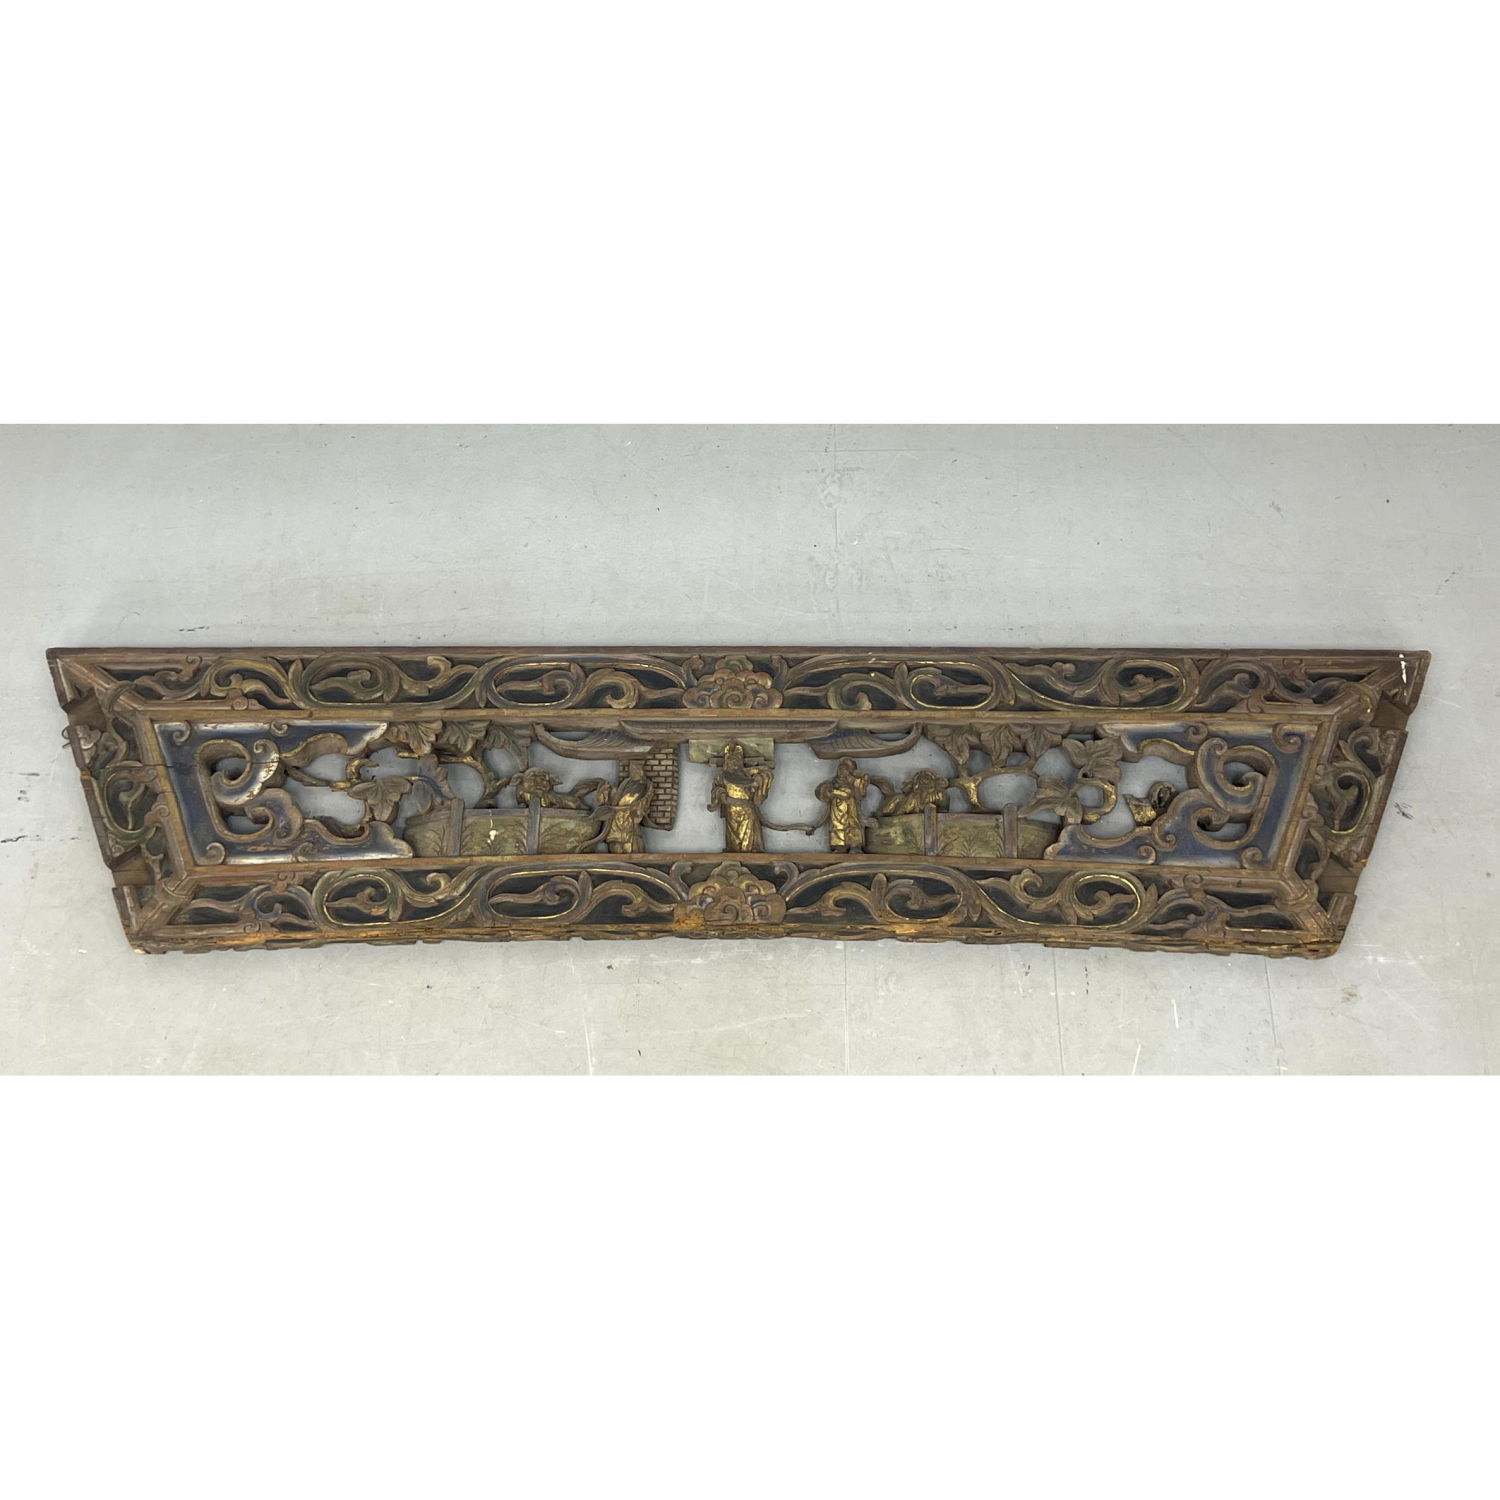 Carved Wood Open Relief Asian Frieze 2b92dc